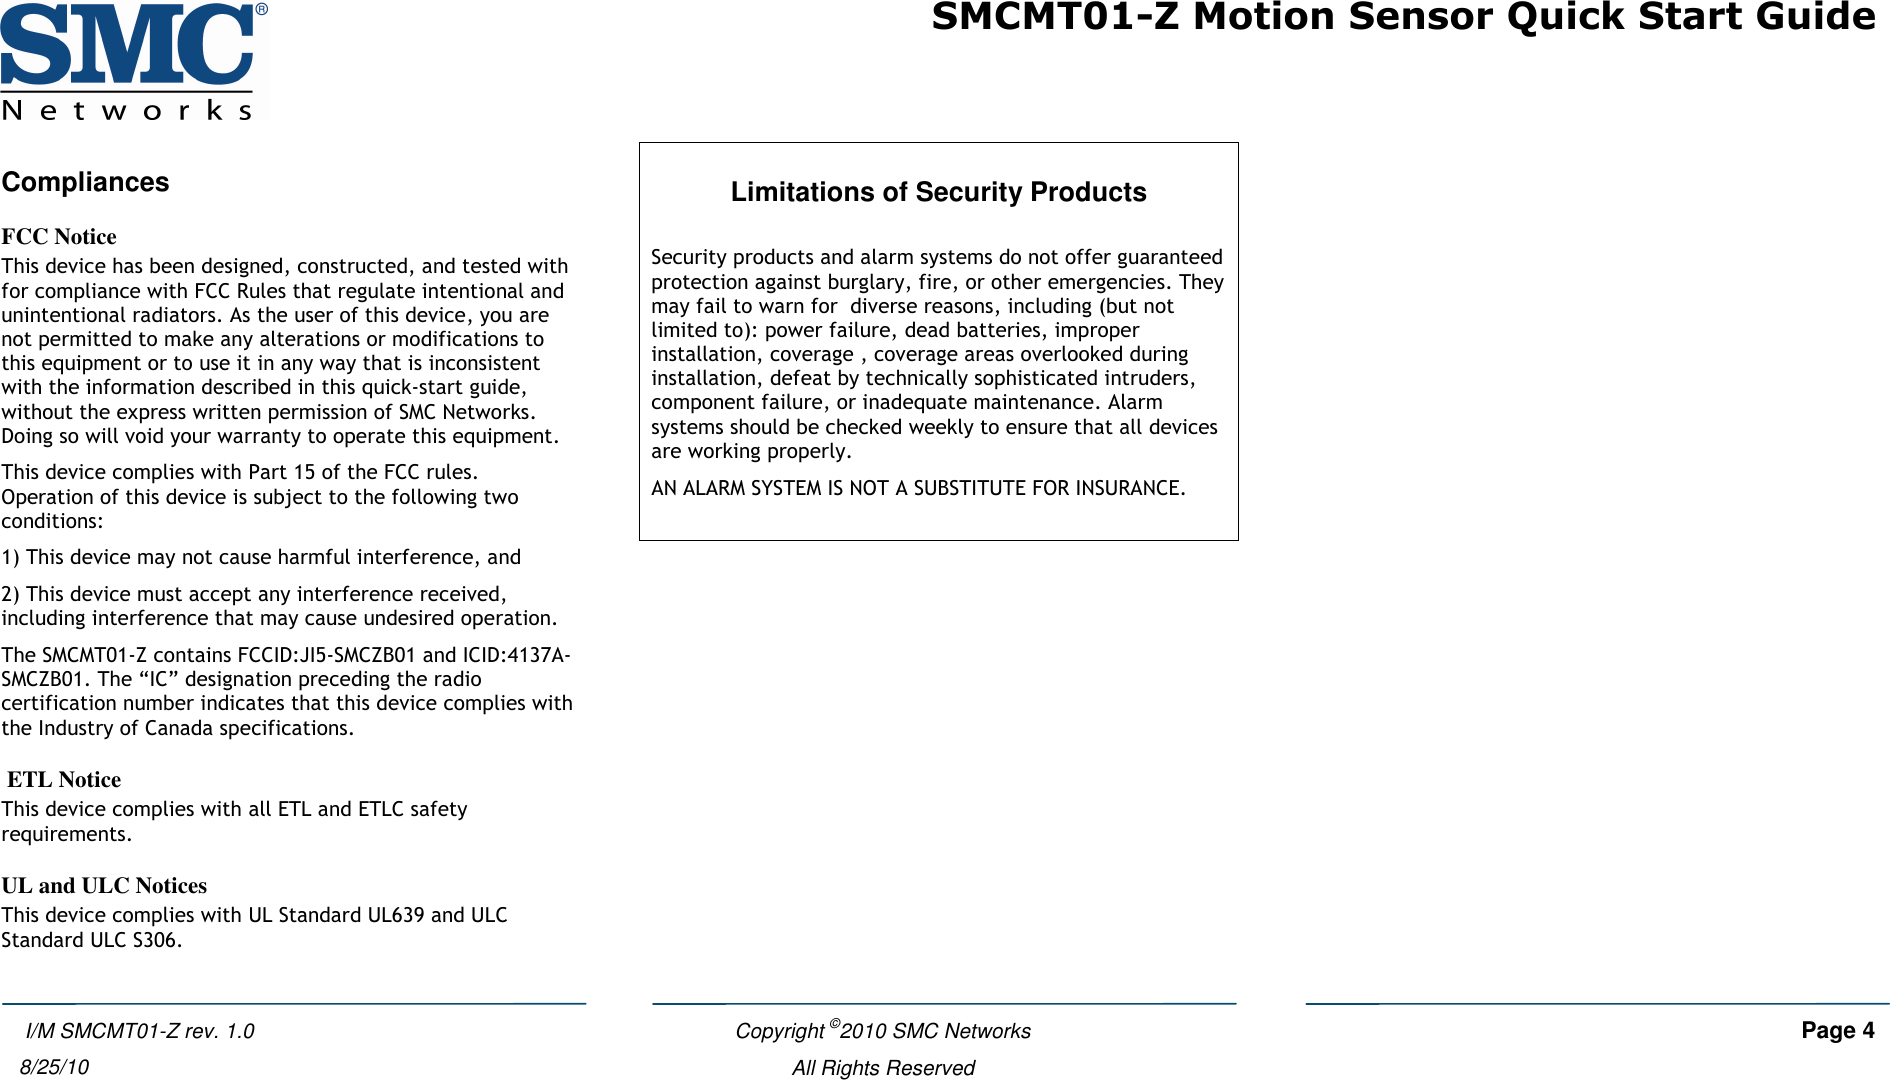 SMCMT01-Z Motion Sensor Quick Start Guide   Copyright ©2010 SMC Networks     Page 4  All Rights Reserved   I/M SMCMT01-Z rev. 1.0 8/25/10 Compliances FCC Notice This device has been designed, constructed, and tested with for compliance with FCC Rules that regulate intentional and unintentional radiators. As the user of this device, you are not permitted to make any alterations or modifications to this equipment or to use it in any way that is inconsistent with the information described in this quick-start guide, without the express written permission of SMC Networks. Doing so will void your warranty to operate this equipment. This device complies with Part 15 of the FCC rules. Operation of this device is subject to the following two conditions:  1) This device may not cause harmful interference, and  2) This device must accept any interference received, including interference that may cause undesired operation. The SMCMT01-Z contains FCCID:JI5-SMCZB01 and ICID:4137A-SMCZB01. The “IC” designation preceding the radio certification number indicates that this device complies with the Industry of Canada specifications.  ETL Notice This device complies with all ETL and ETLC safety requirements. UL and ULC Notices This device complies with UL Standard UL639 and ULC Standard ULC S306.  Limitations of Security Products  Security products and alarm systems do not offer guaranteed protection against burglary, fire, or other emergencies. They may fail to warn for  diverse reasons, including (but not limited to): power failure, dead batteries, improper installation, coverage , coverage areas overlooked during installation, defeat by technically sophisticated intruders, component failure, or inadequate maintenance. Alarm systems should be checked weekly to ensure that all devices are working properly.  AN ALARM SYSTEM IS NOT A SUBSTITUTE FOR INSURANCE.   